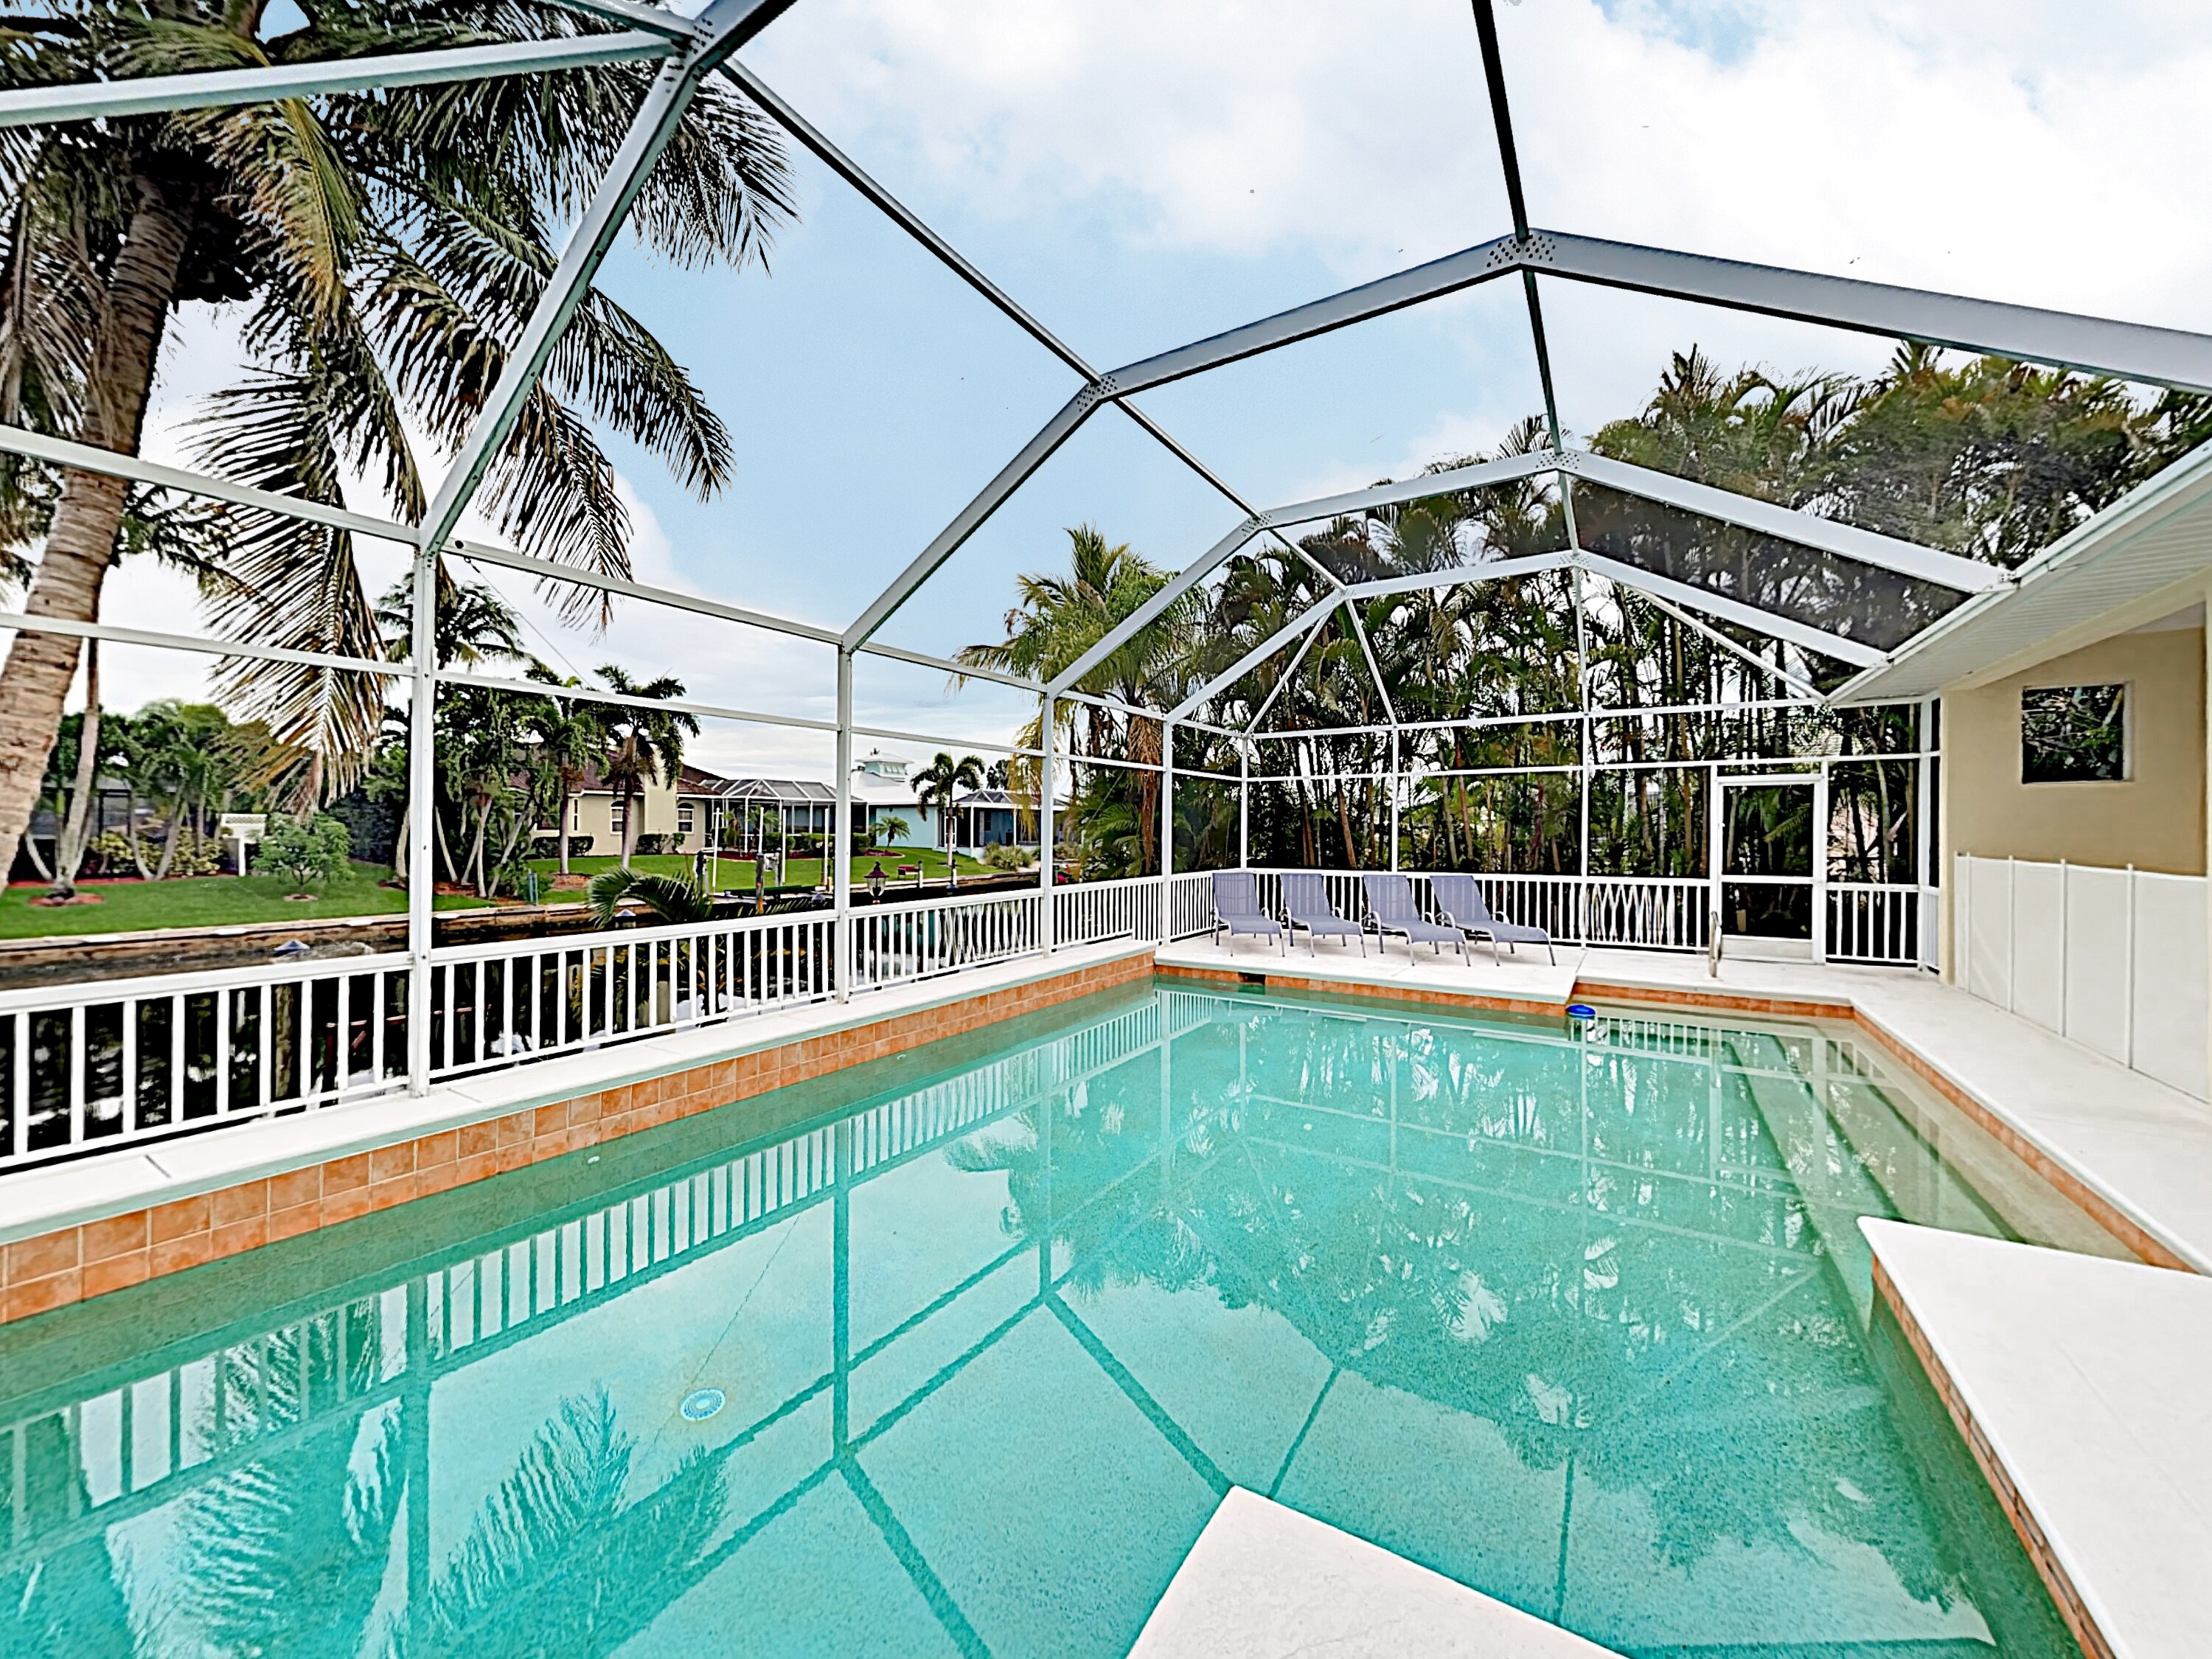 Welcome to Cape Coral! This home is professionally managed by TurnKey Vacation Rentals.